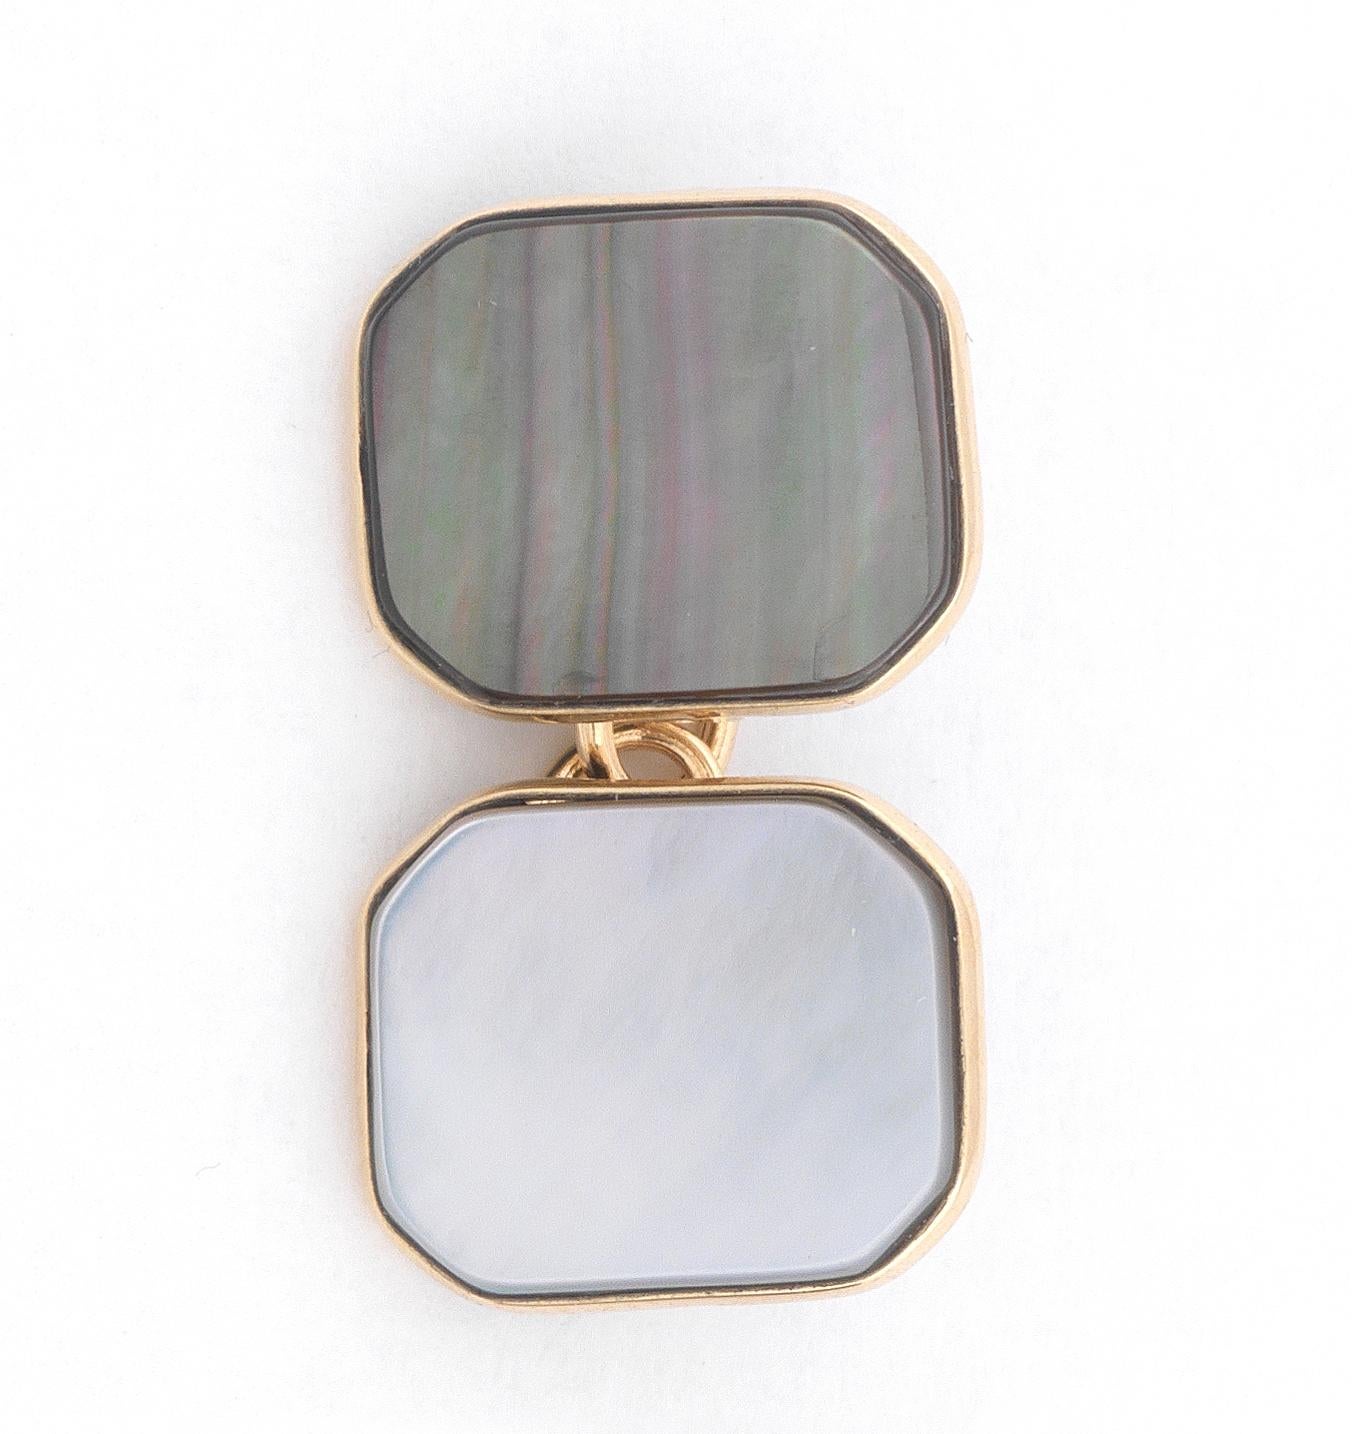 Square shaped mother of pearl and gold, lenght 13mm x 11mm